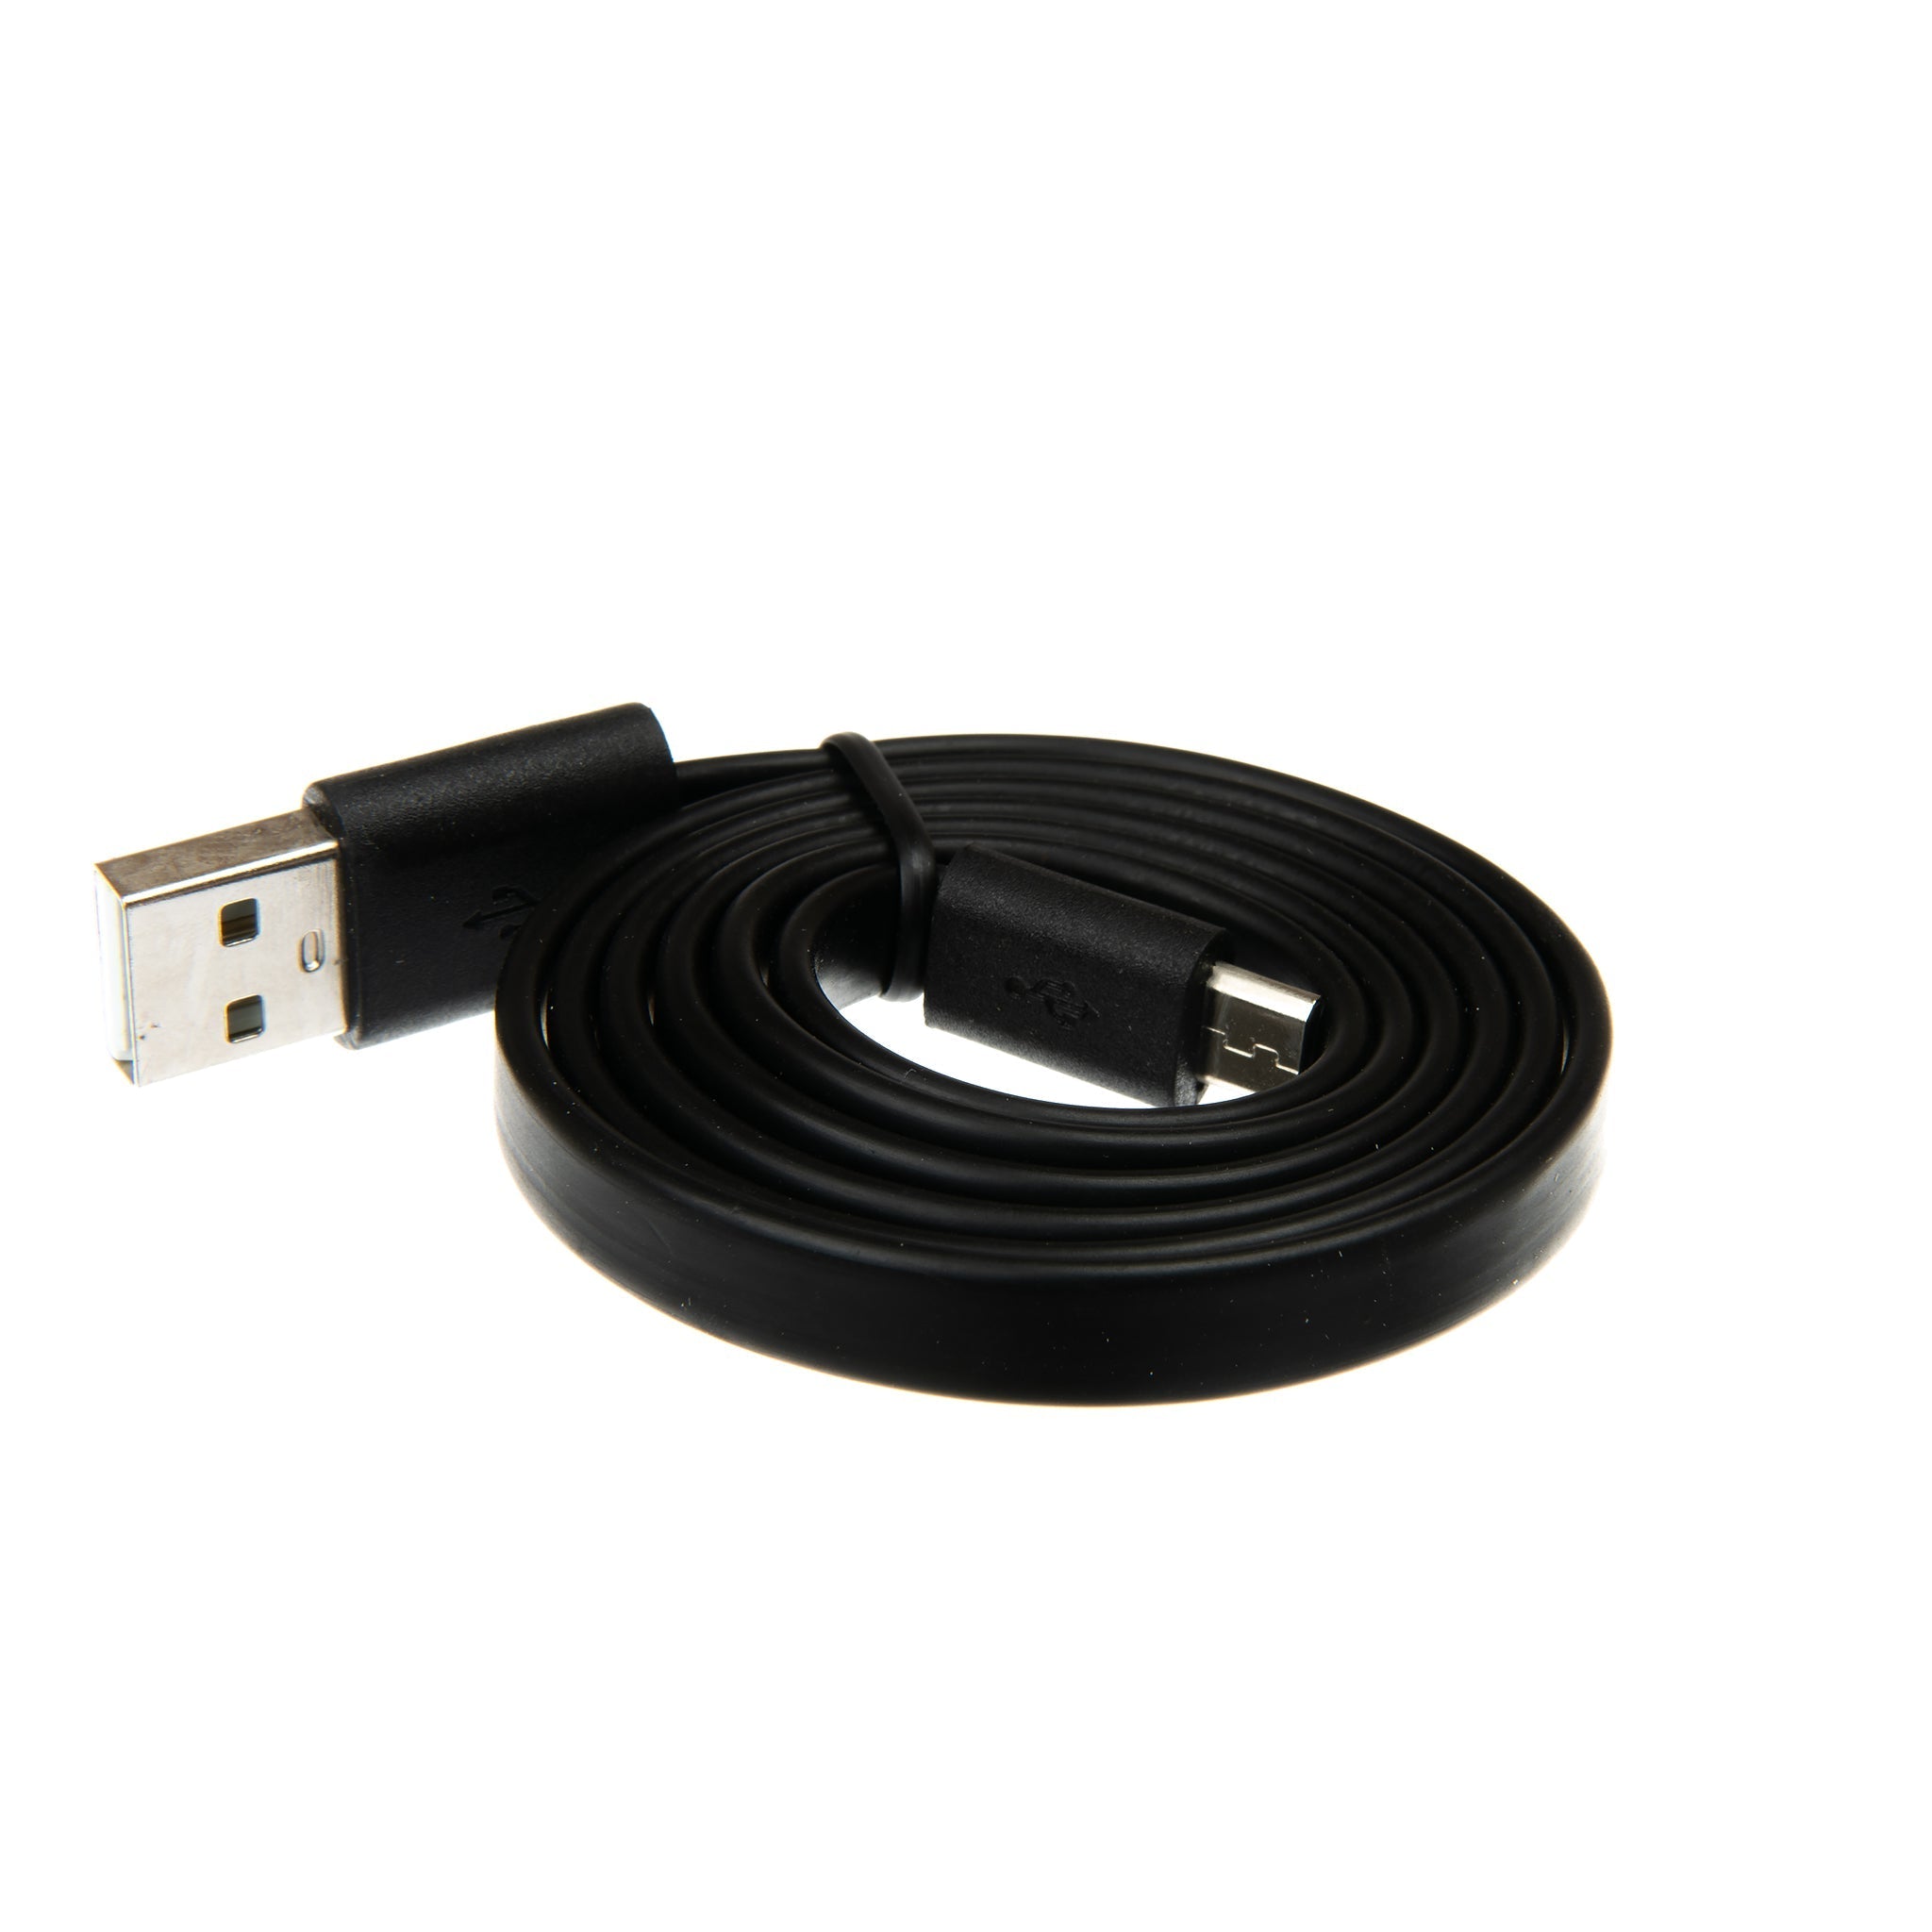 Firefly 2+ USB cable